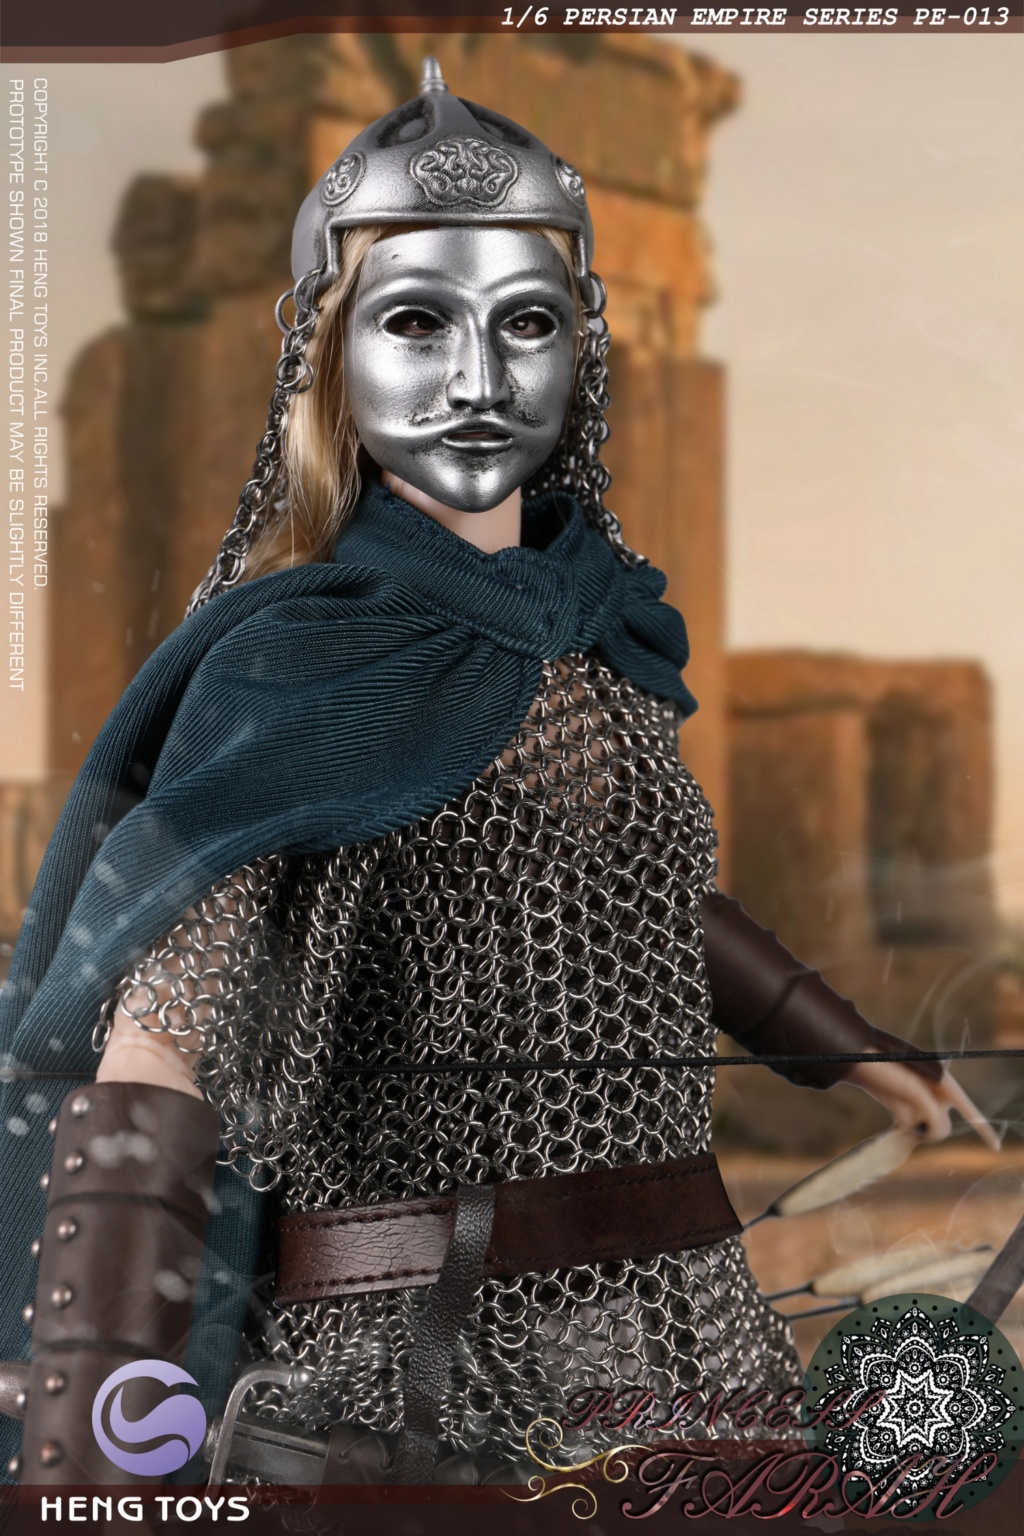 NEW PRODUCT: HENG TOYS: 1/6 Persian Female Archer Standard Edition (PE012) & High Edition (PE013) 10381110